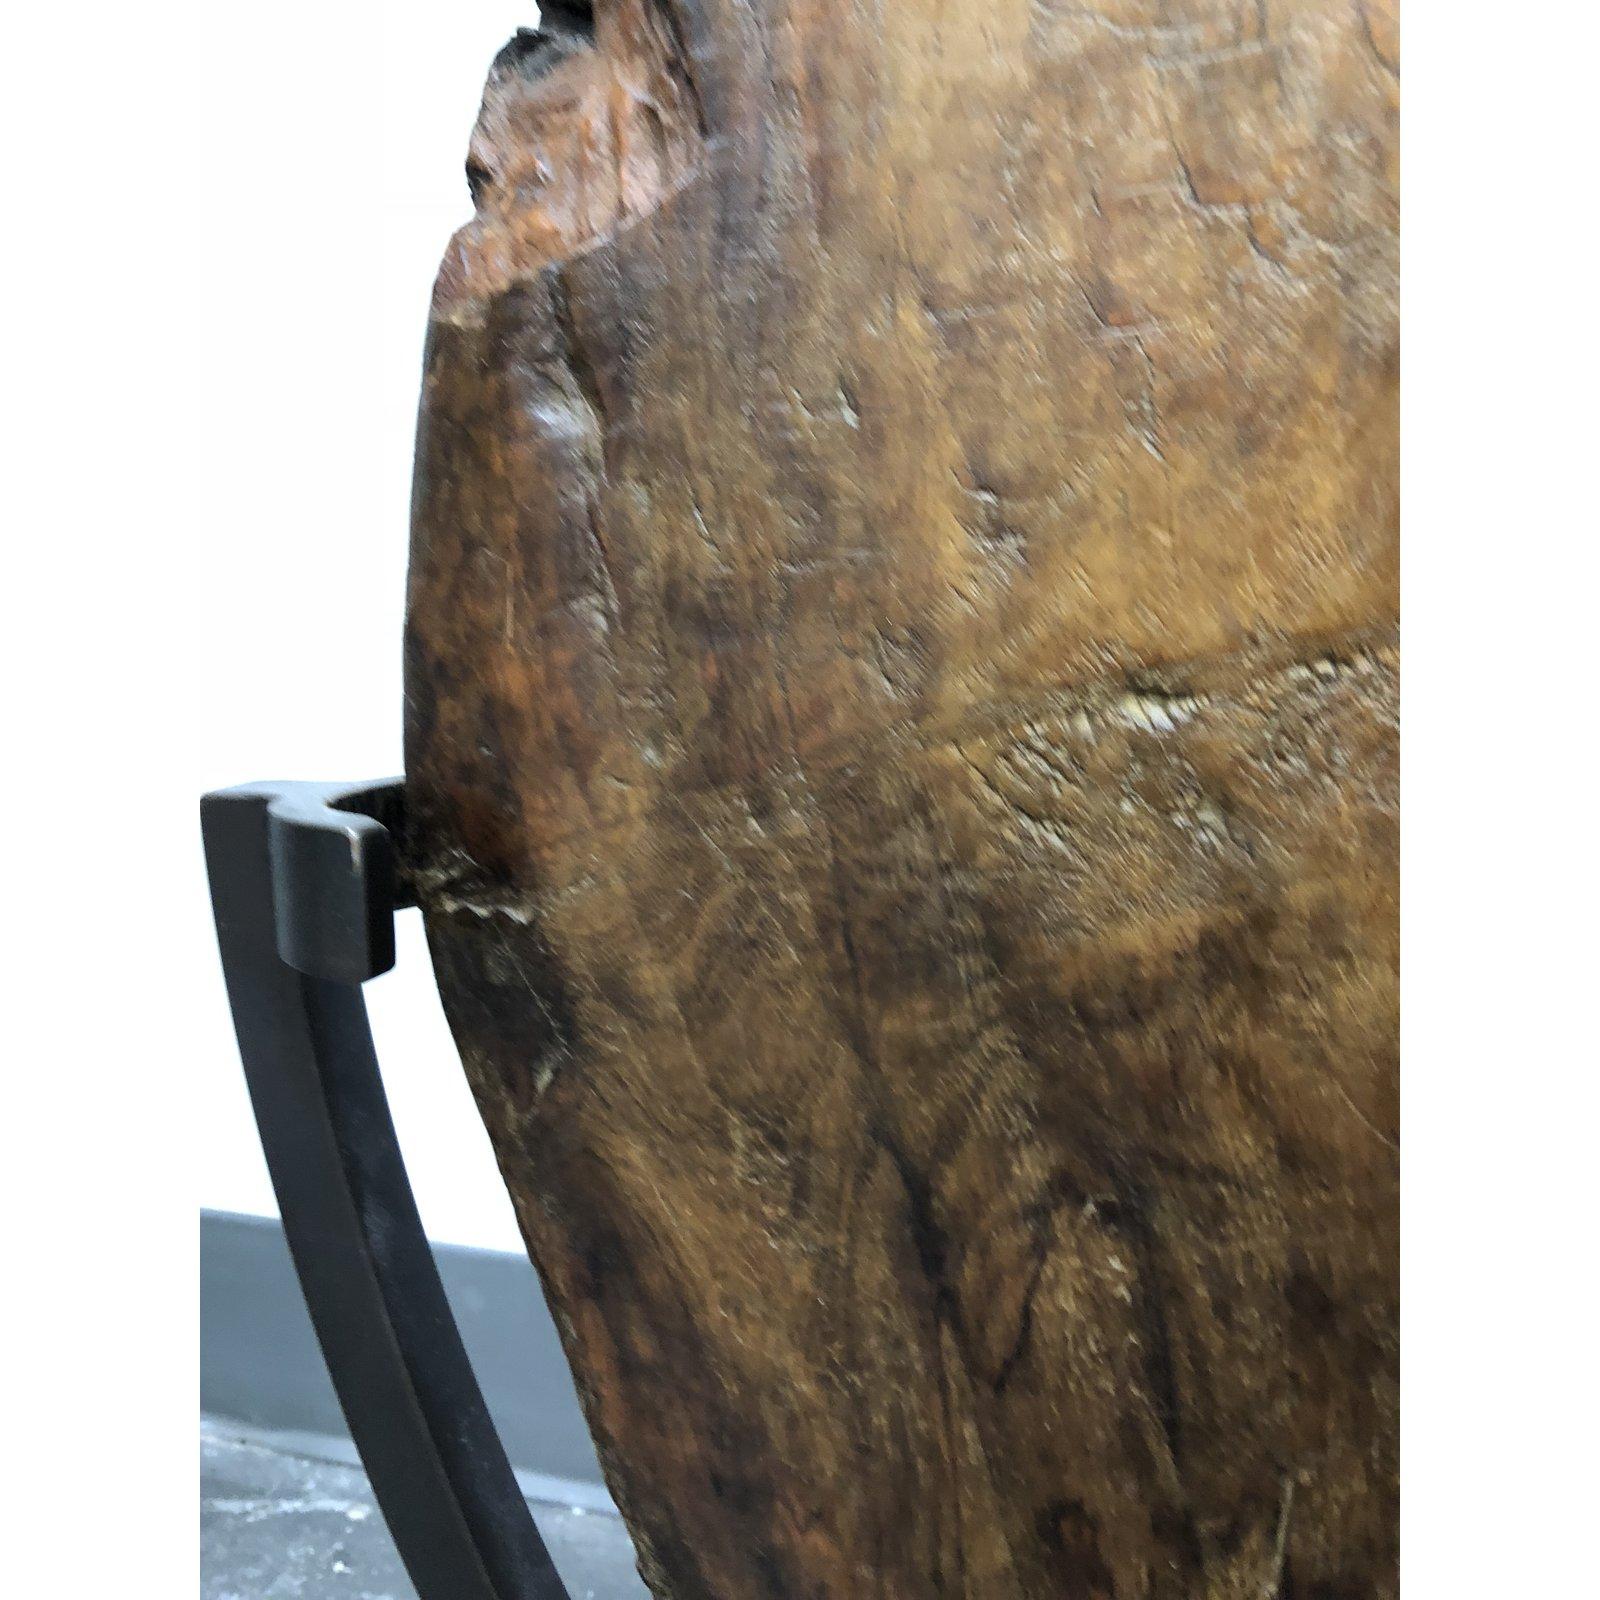 An antique cart wheel made of Narra wood, a commercially extinct hardwood with dense grain. Repairs made in iron are from the early 20th and late 19th century. Such wheels, fitted with iron rims were wheels on carts bringing agricultural goods to